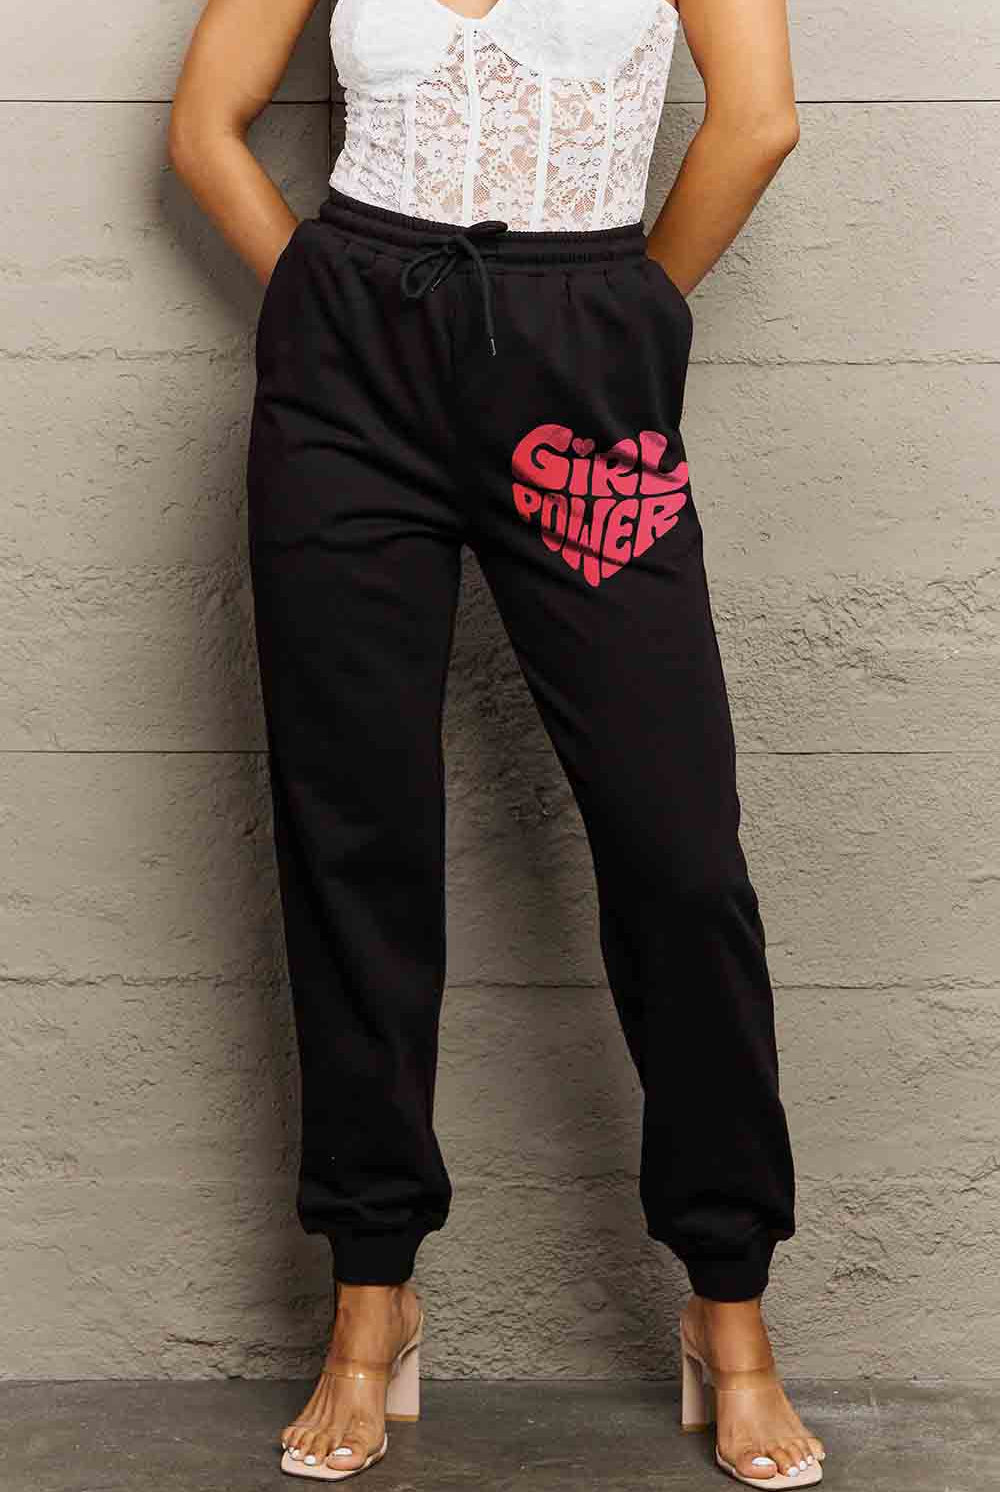 Rosy Brown Simply Love Full Size GIRL POWER Graphic Sweatpants Sweatpants